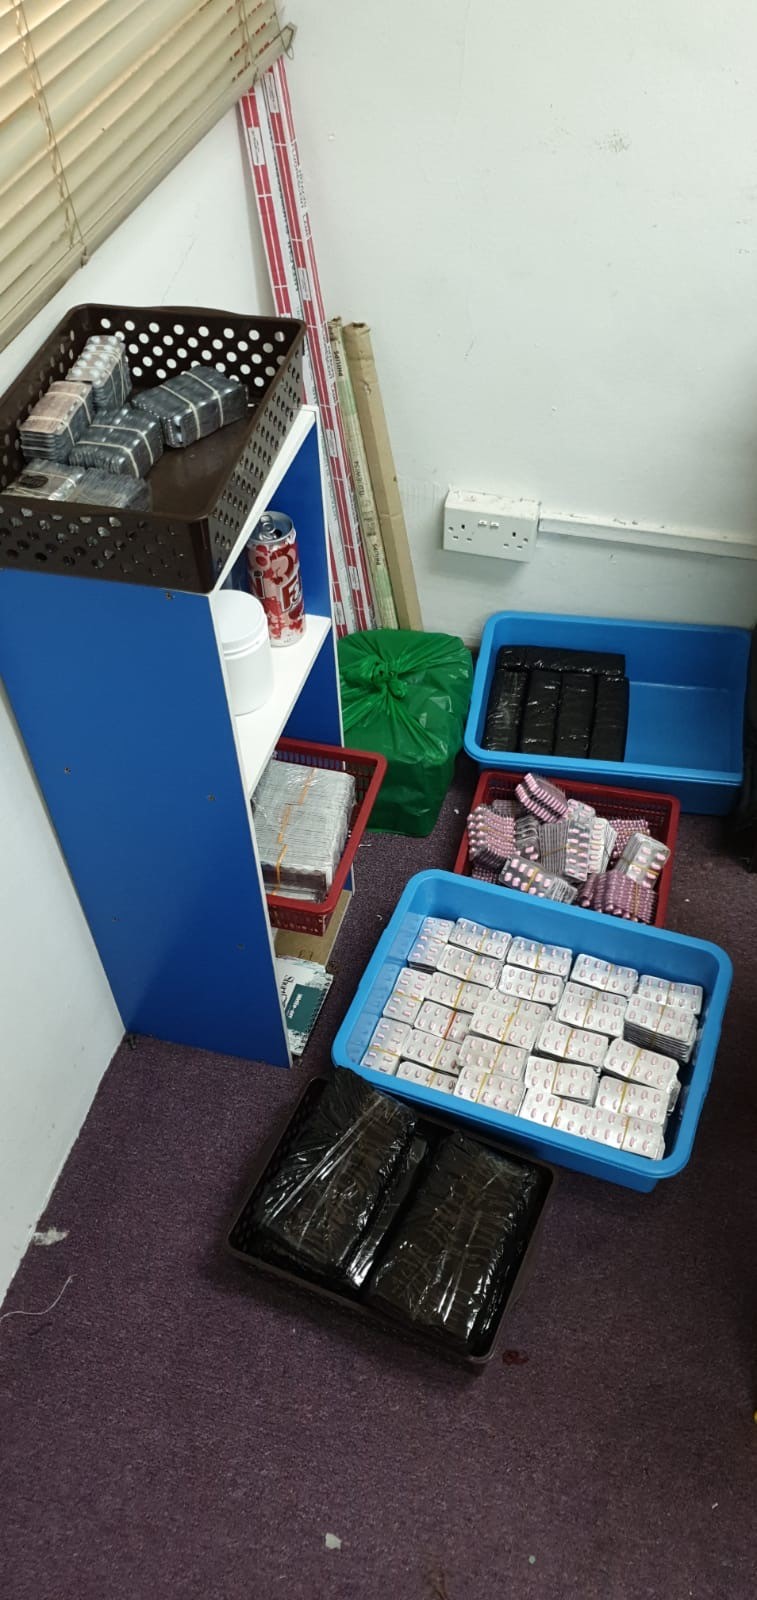 $80,000 WORTH OF ILLEGAL COUGH SYRUP AND ASSORTED MEDICINES SEIZED IN MULTI-AGENCY OPERATION